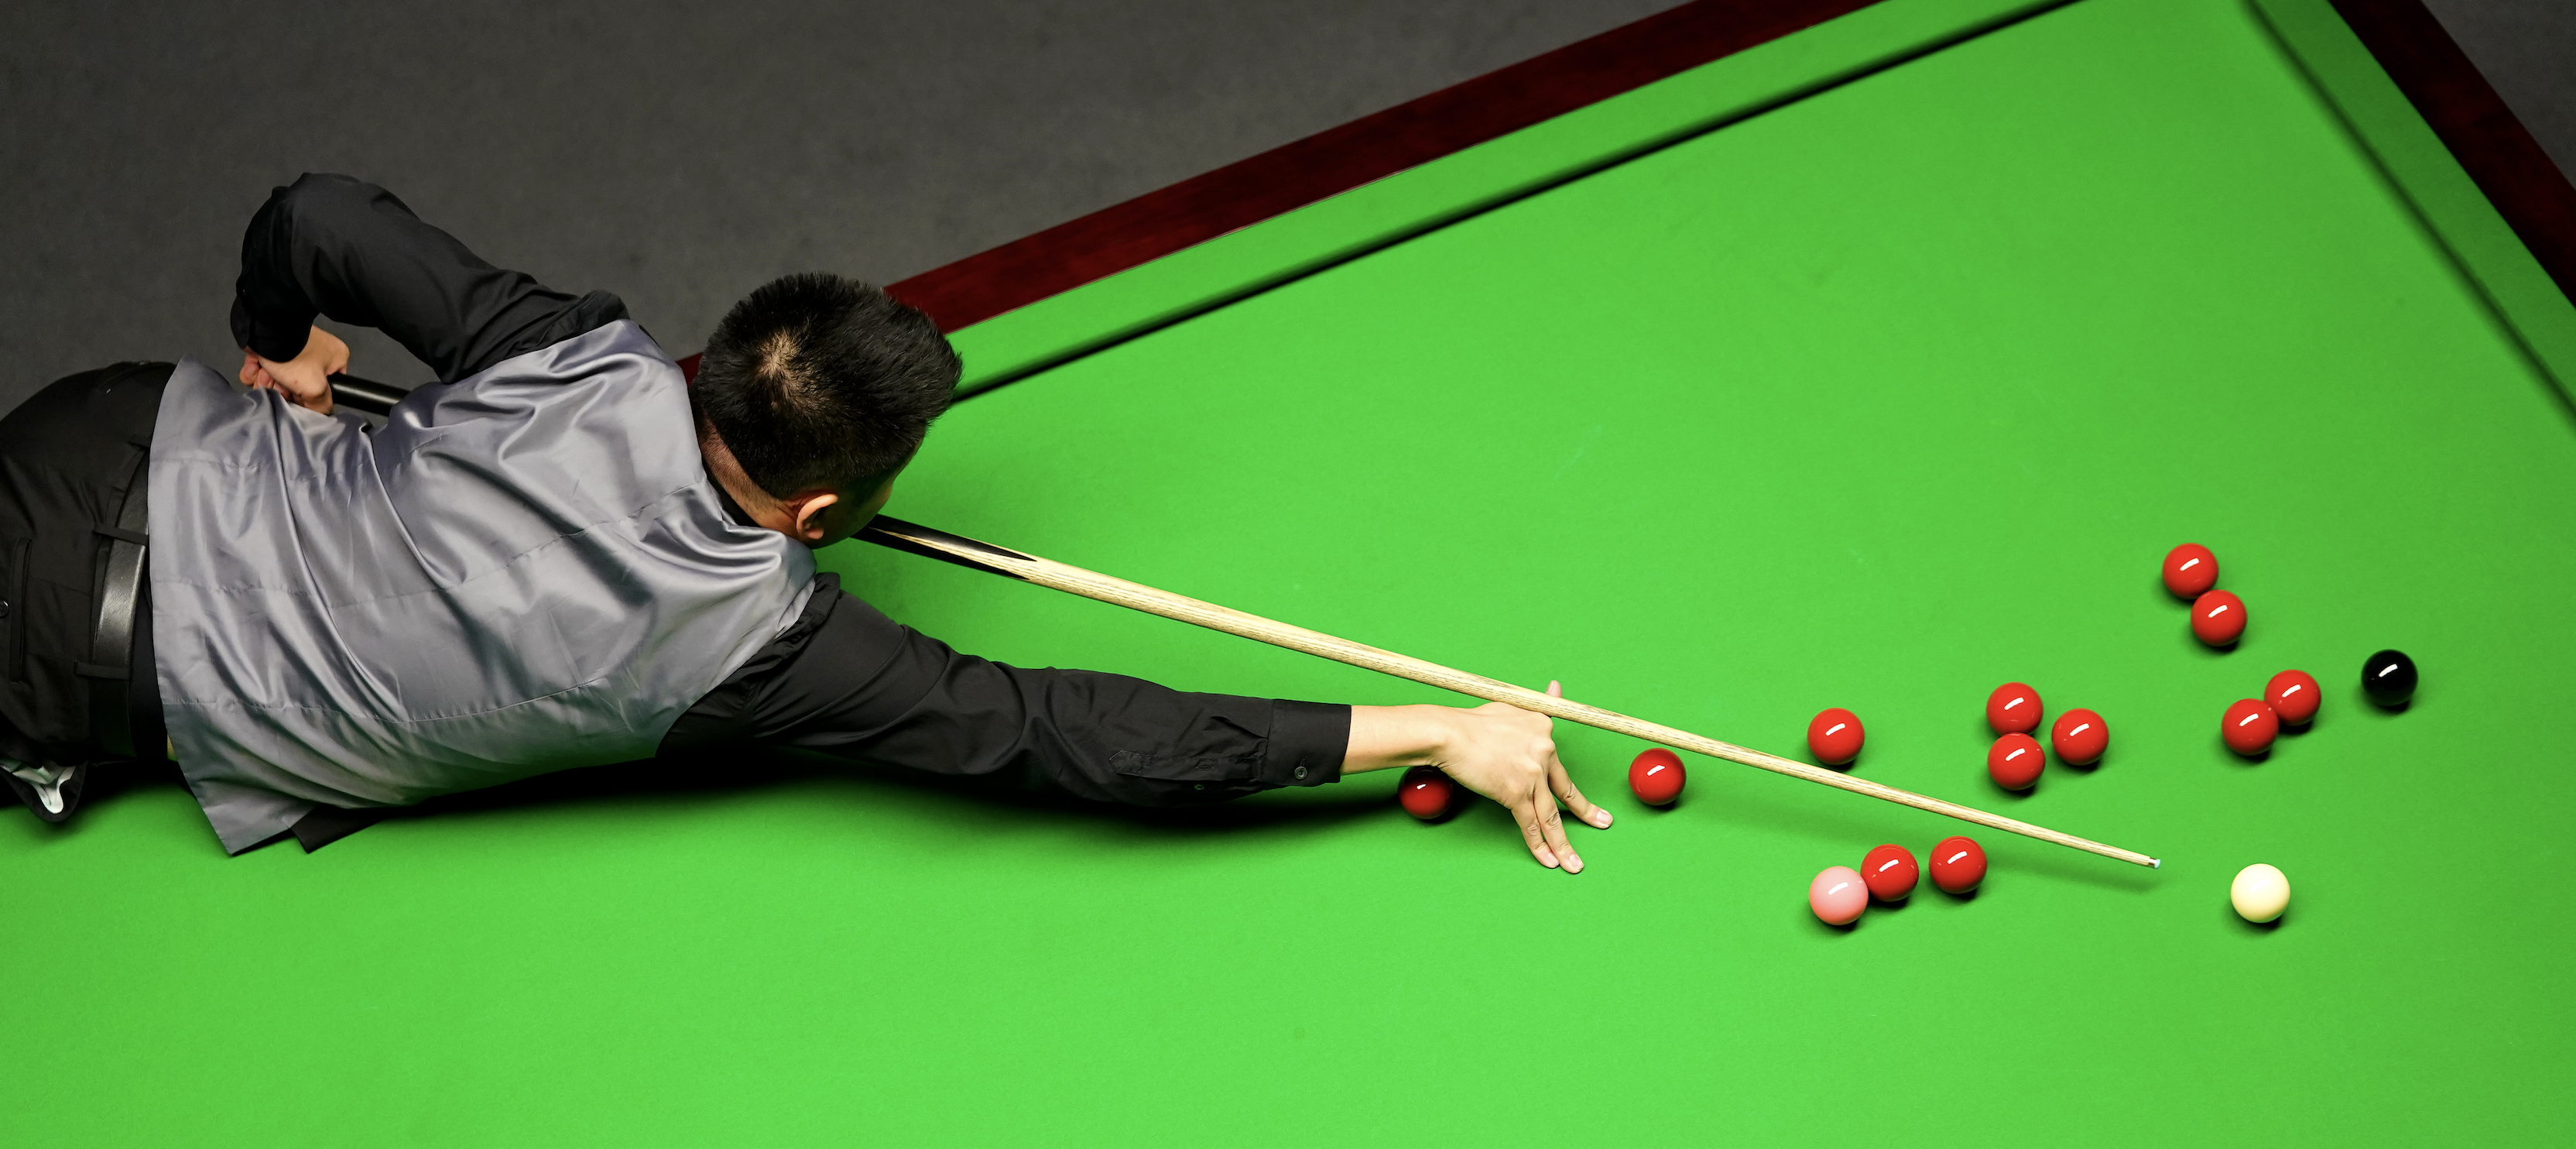 Worldwide clampdown finds snooker matches were fixed at European Masters Qualifiers in Leicester ITV News Central